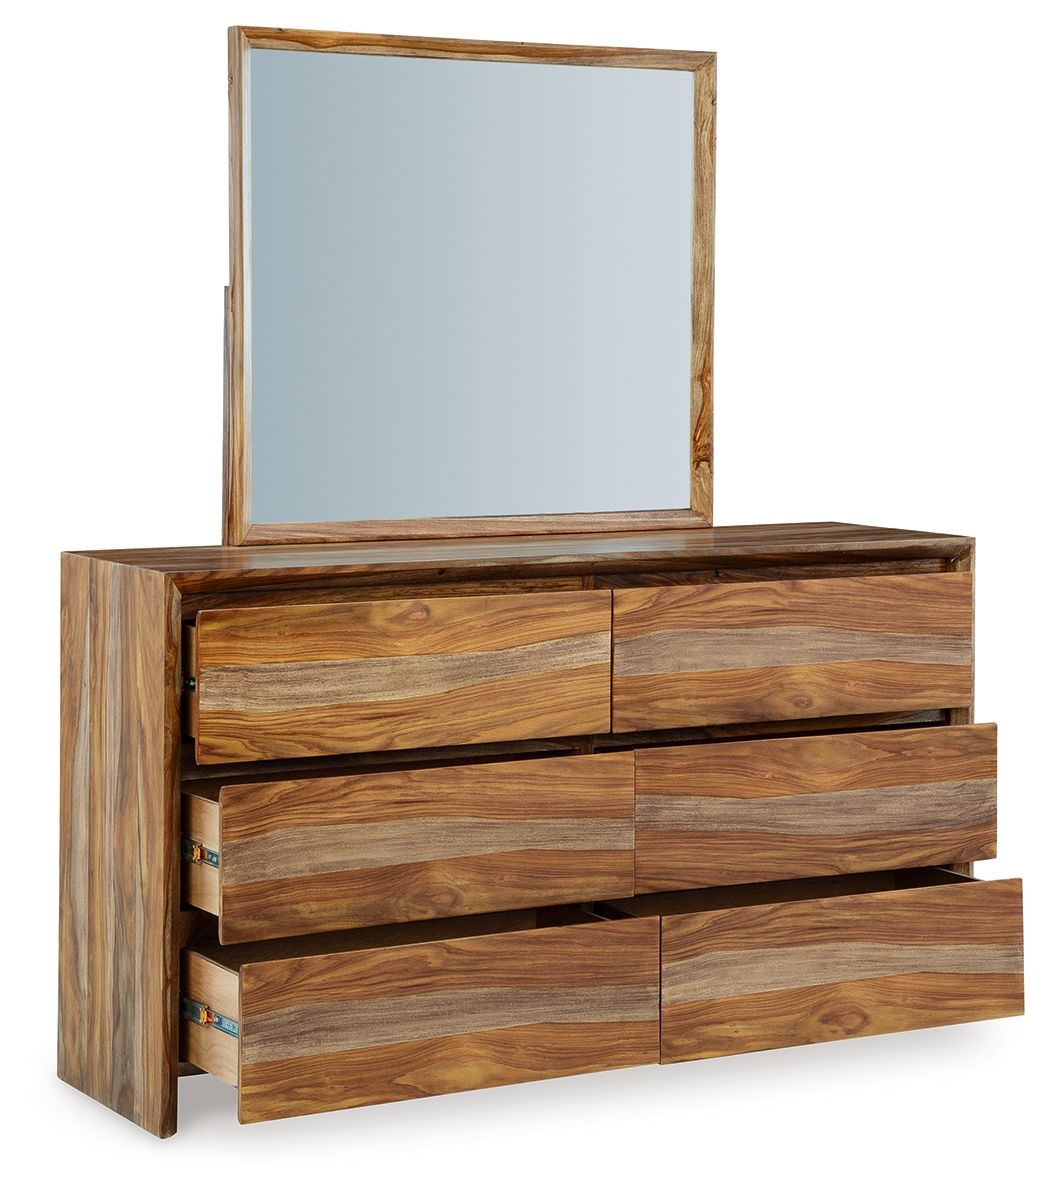 Dressonni - Brown - Dresser And Mirror - Tony's Home Furnishings